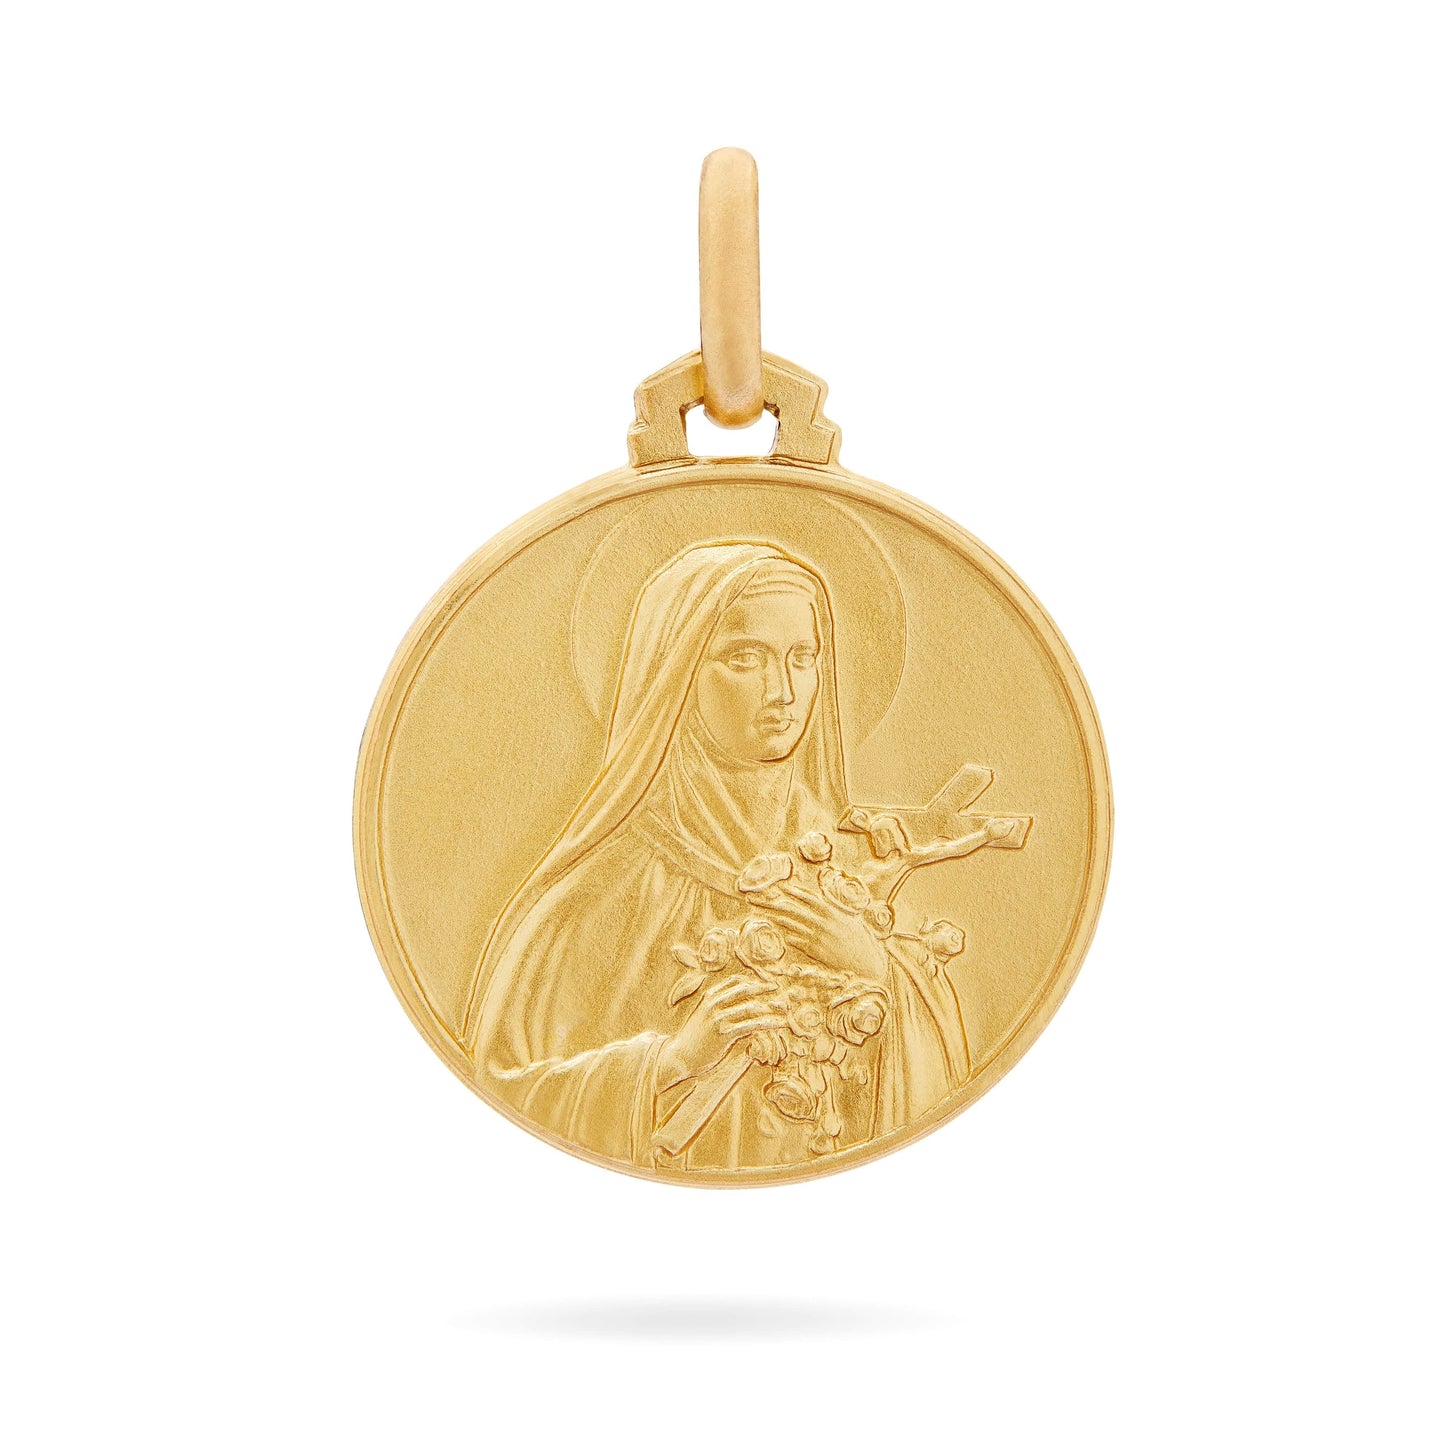 MONDO CATTOLICO Jewelry 18 mm (0.70 in) Gold medal of Saint Therese of Lisieux